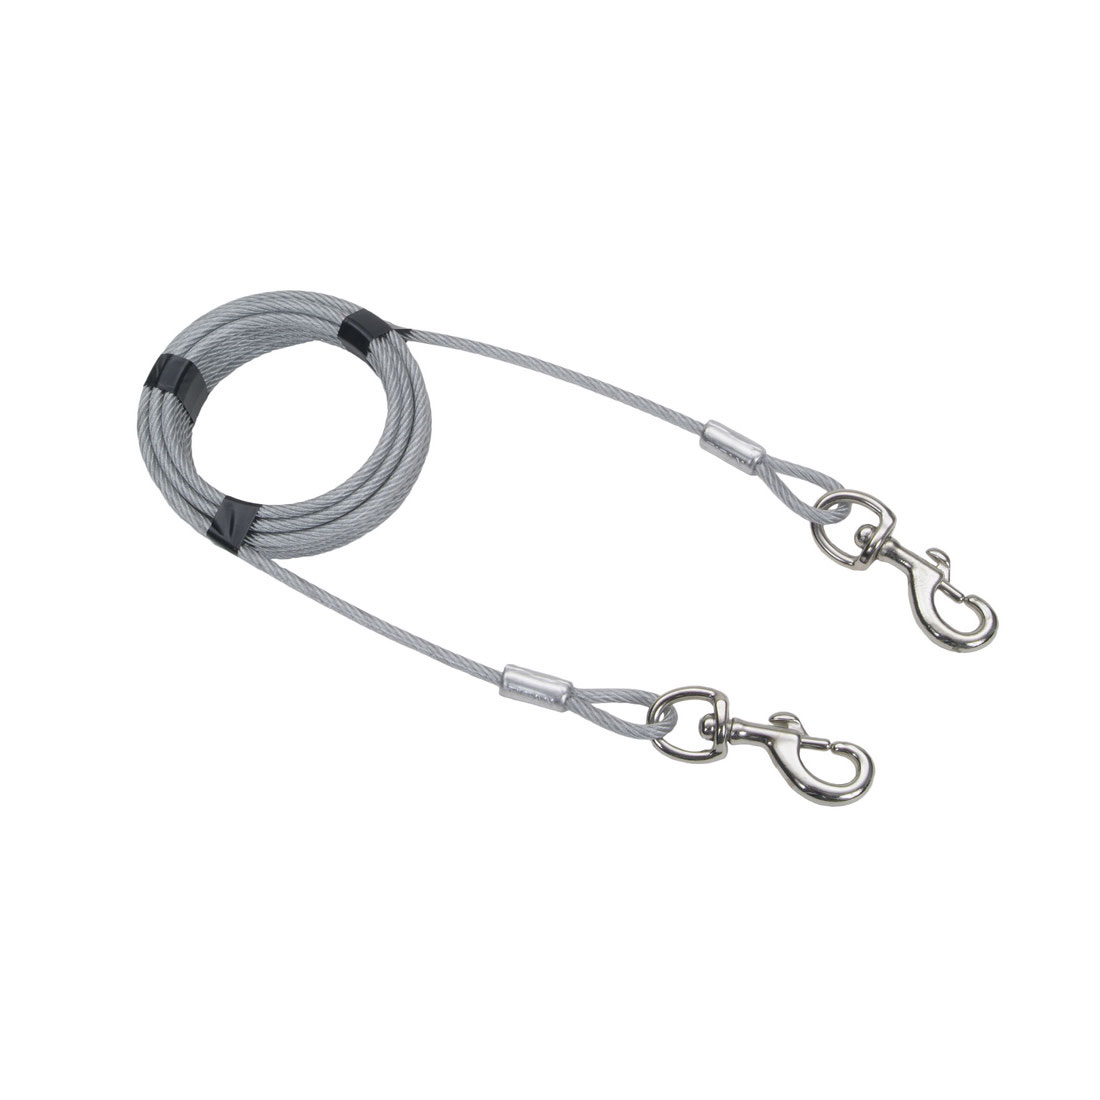 Titan® Giant Cable Dog Tie Out